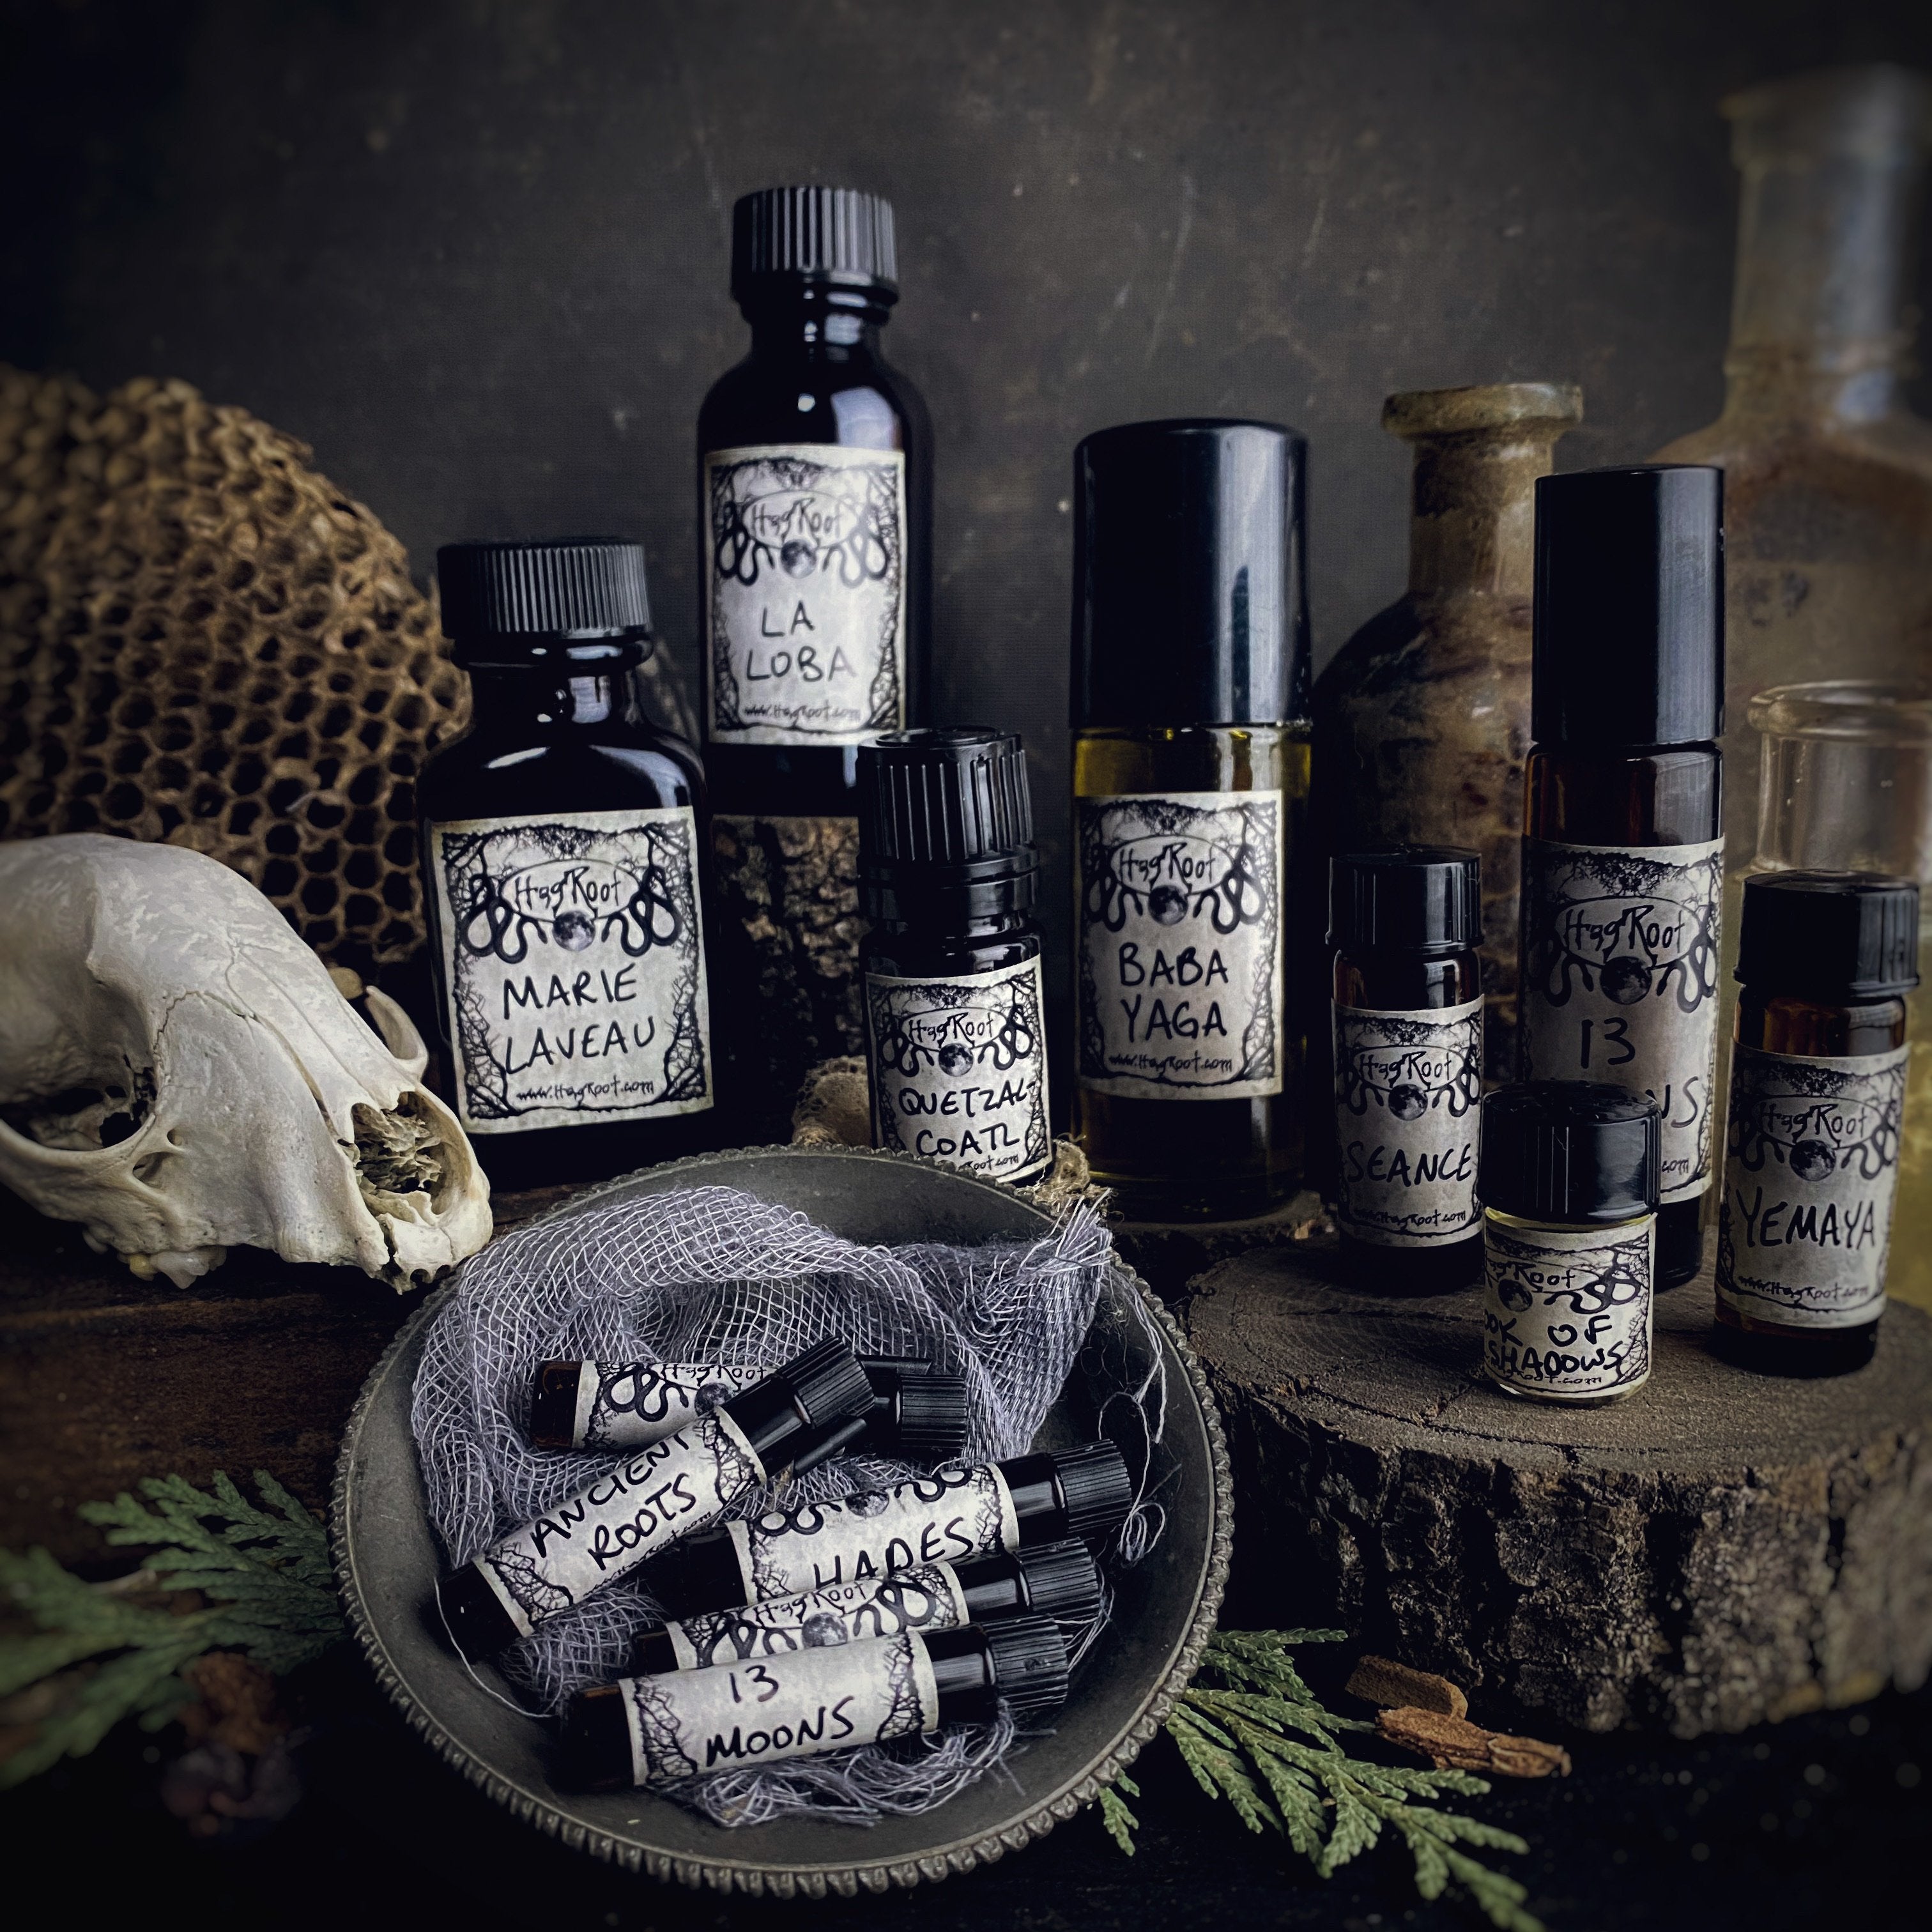 SOUTHERN CONJURE-(Magnolia Blossoms, Cypress, Spanish Moss, Charred Ritual Wood)-Perfume, Cologne, Anointing, Ritual Oil